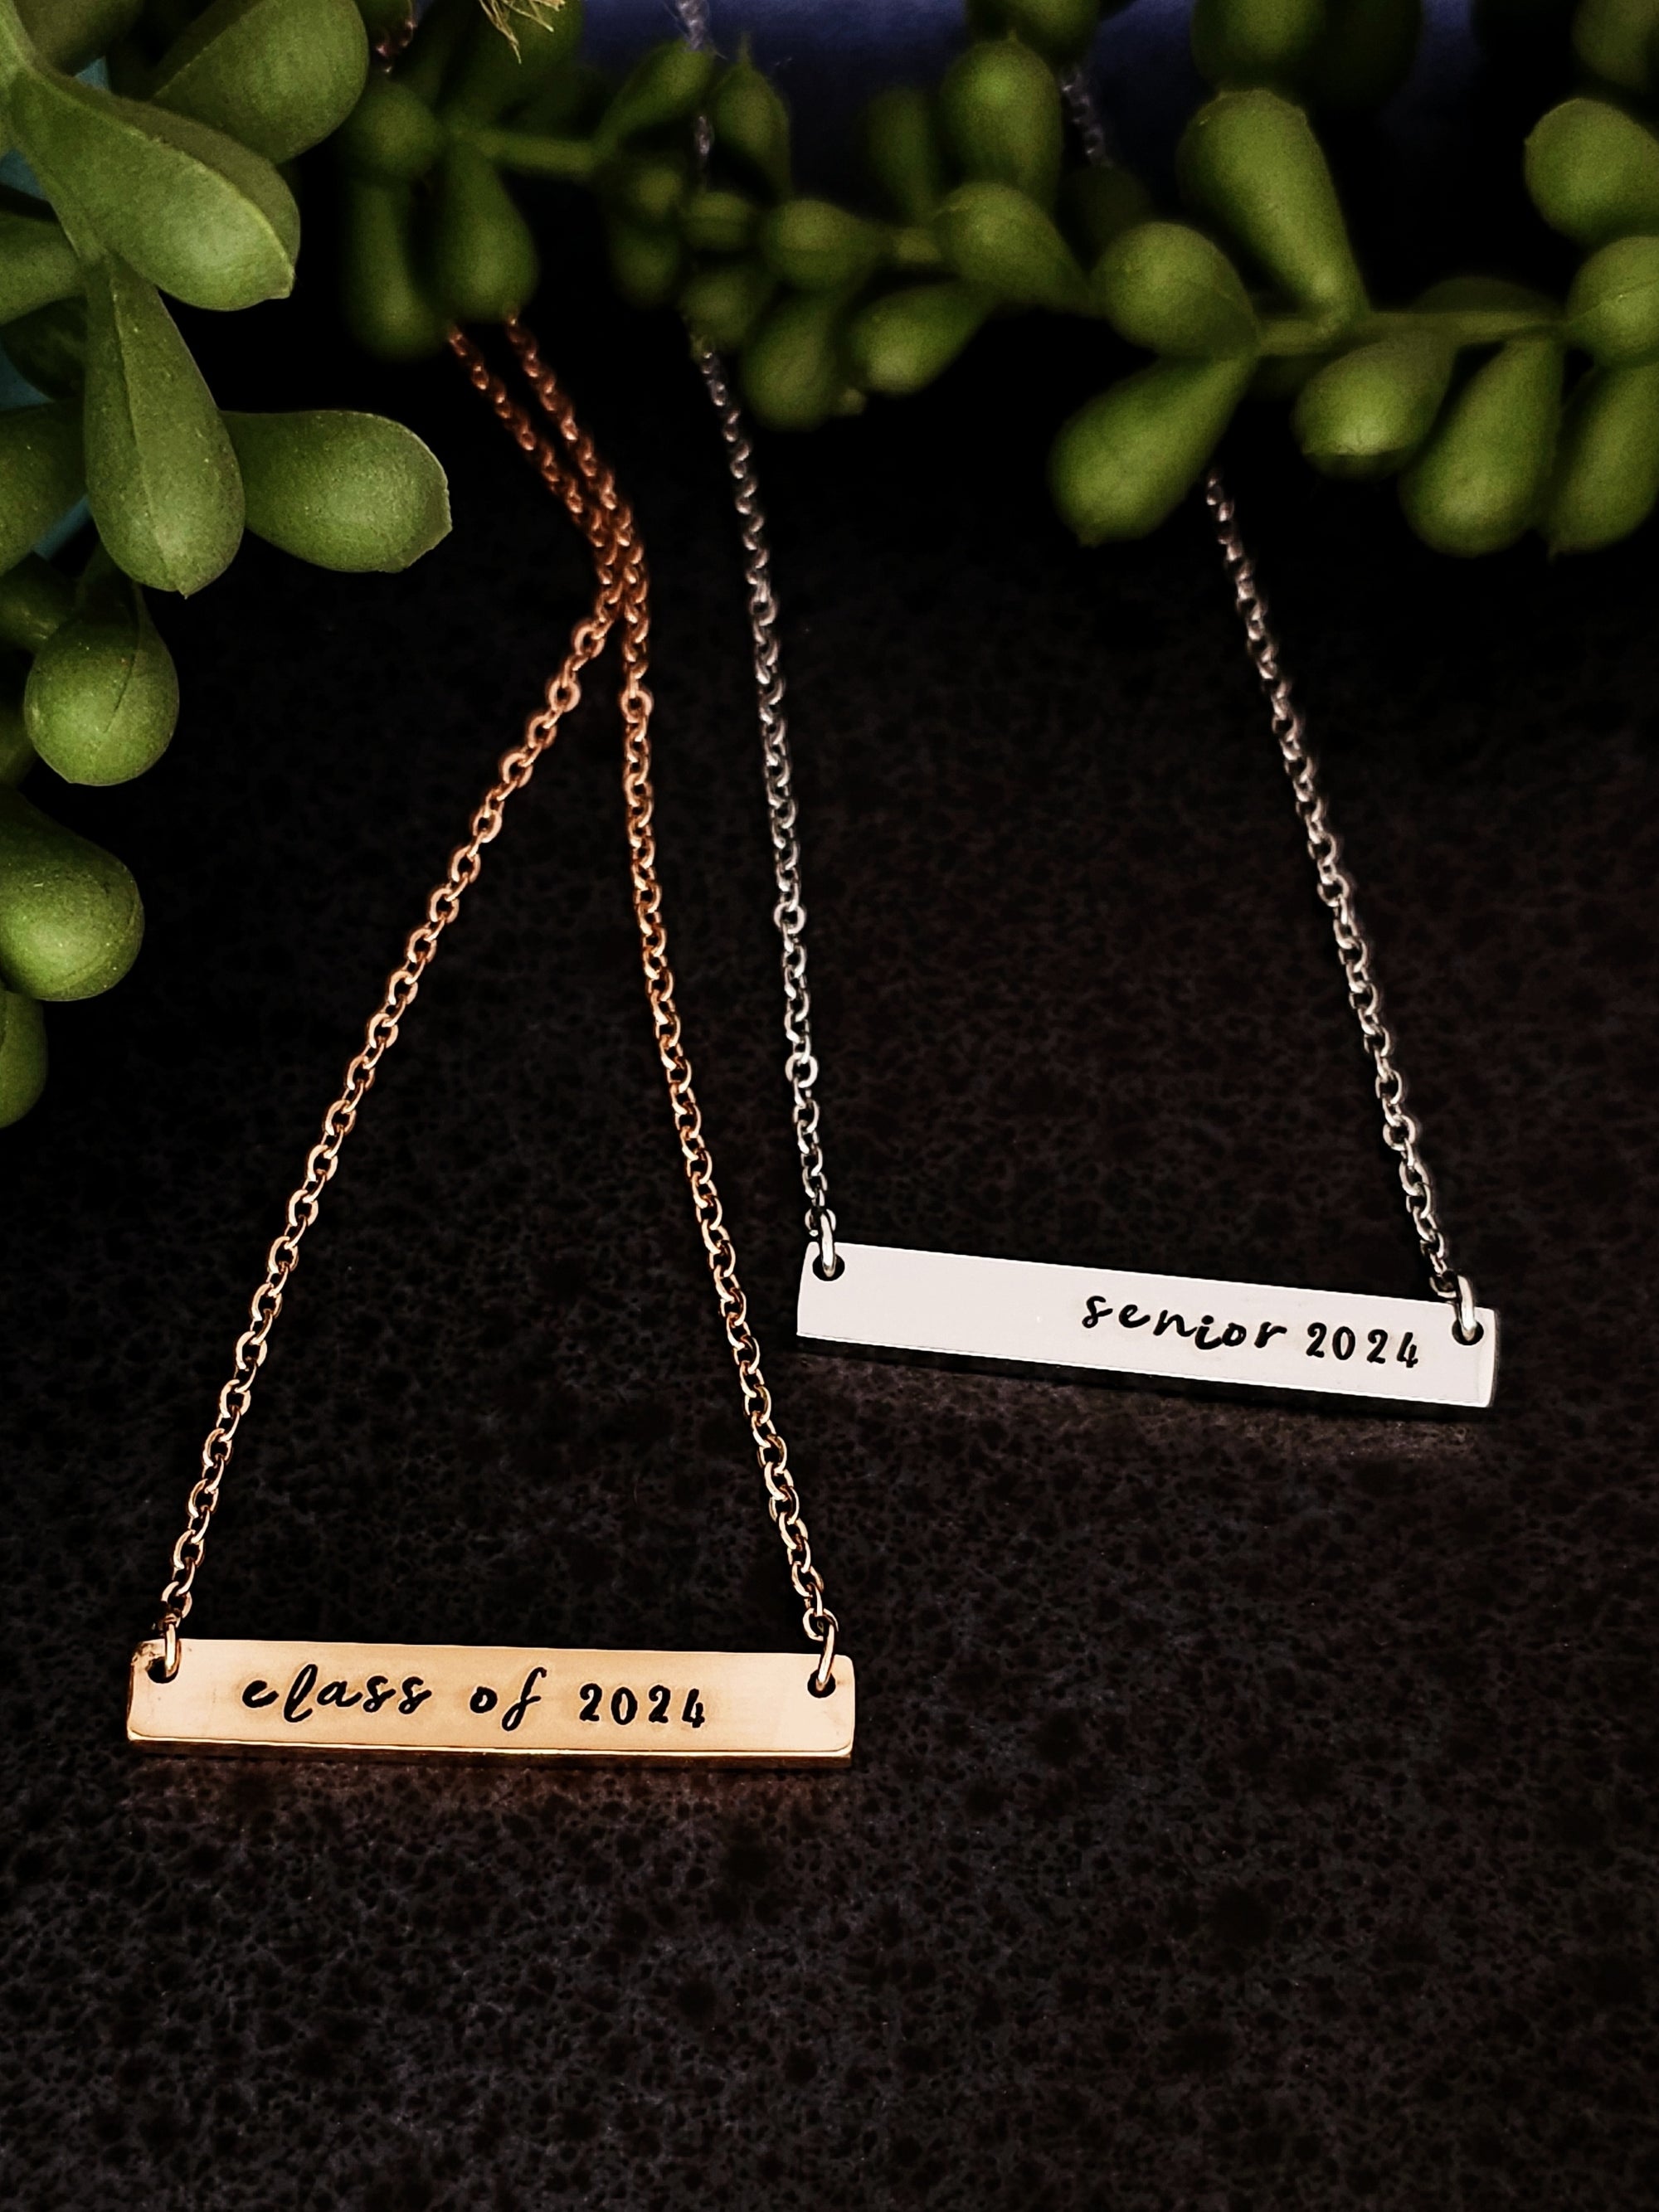 Class of 2024, Grad Gift, Graduation Gift, Senior Jewelry, Name bar Necklace, Personalized Necklace, Silver Bar Necklace, Rose Gold Necklace